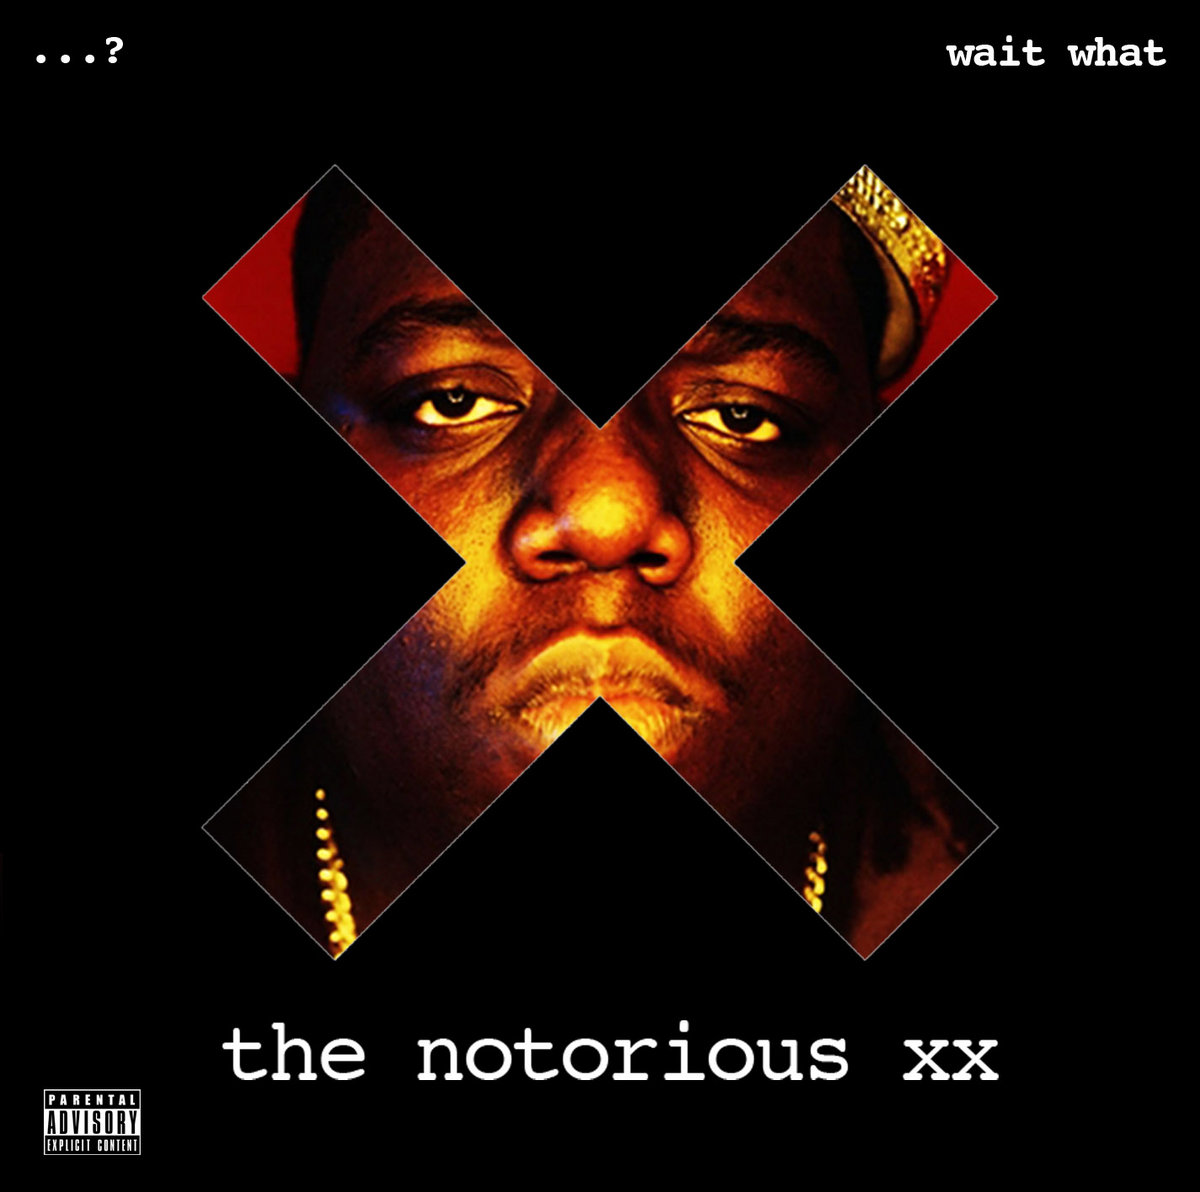 juicy-r [the notorious b.i.g. vs. the xx] | wait what